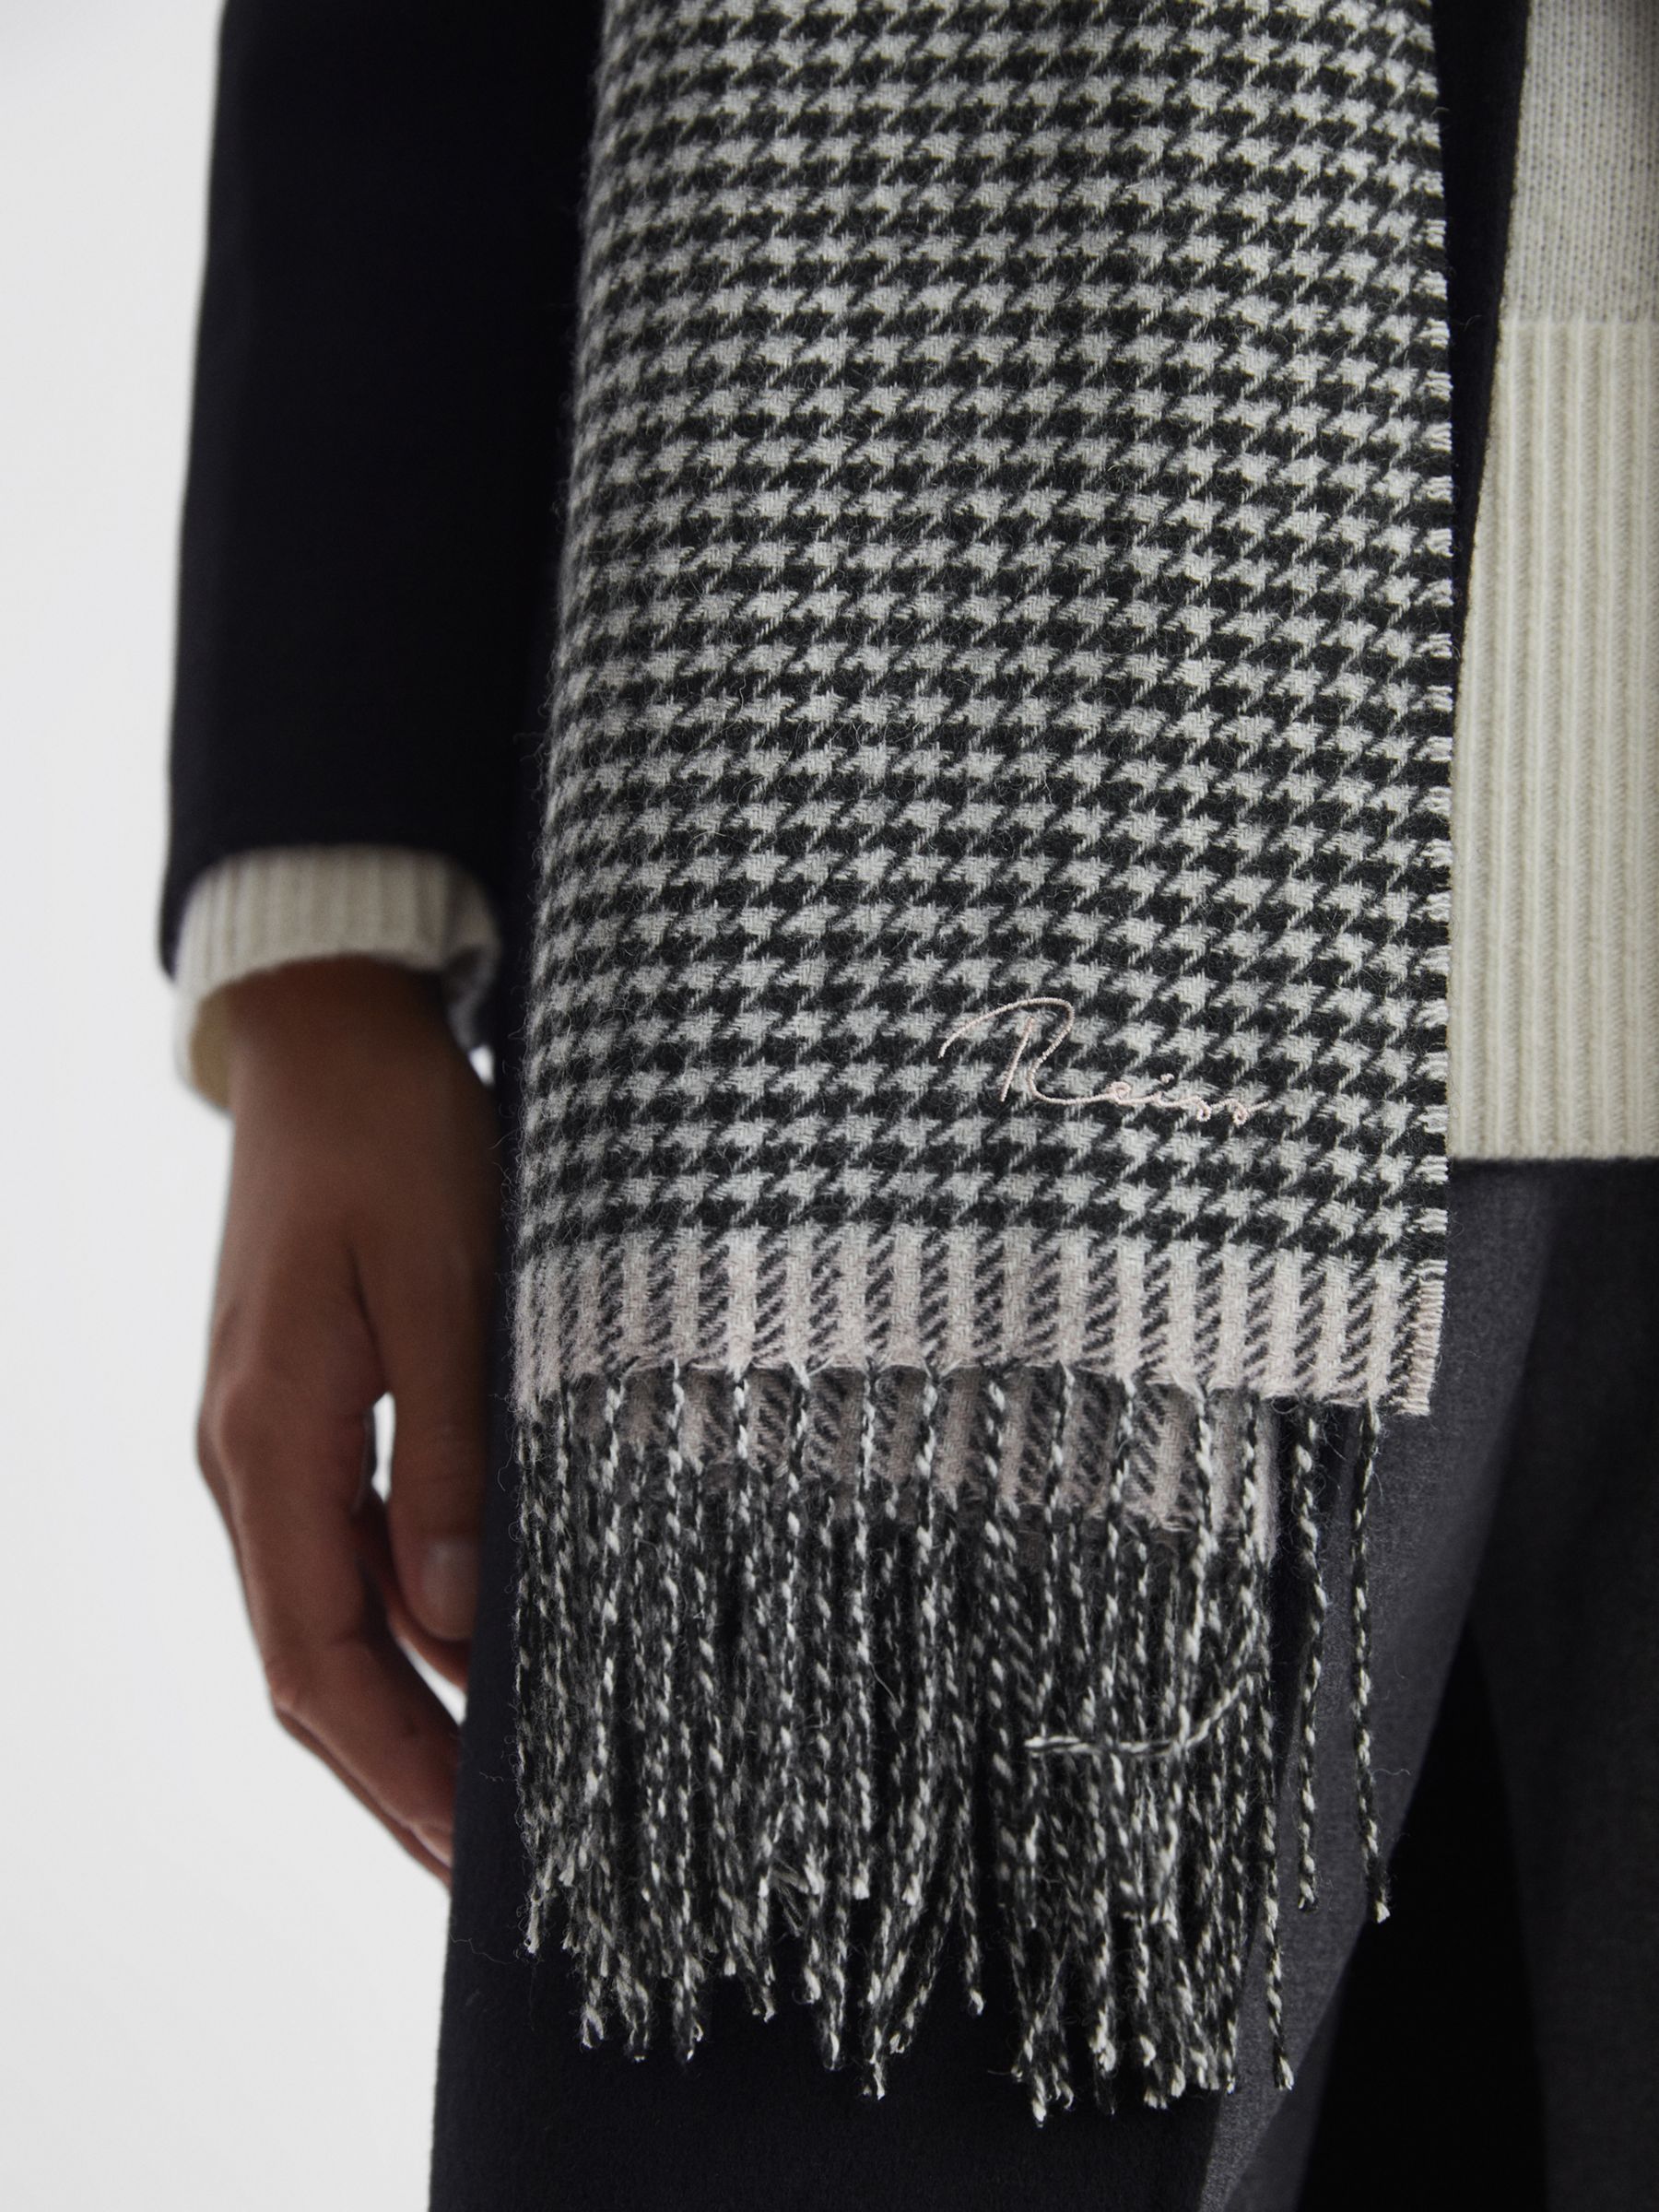 Reiss Victoria Dogtooth Wool Blend Scarf, Black/White